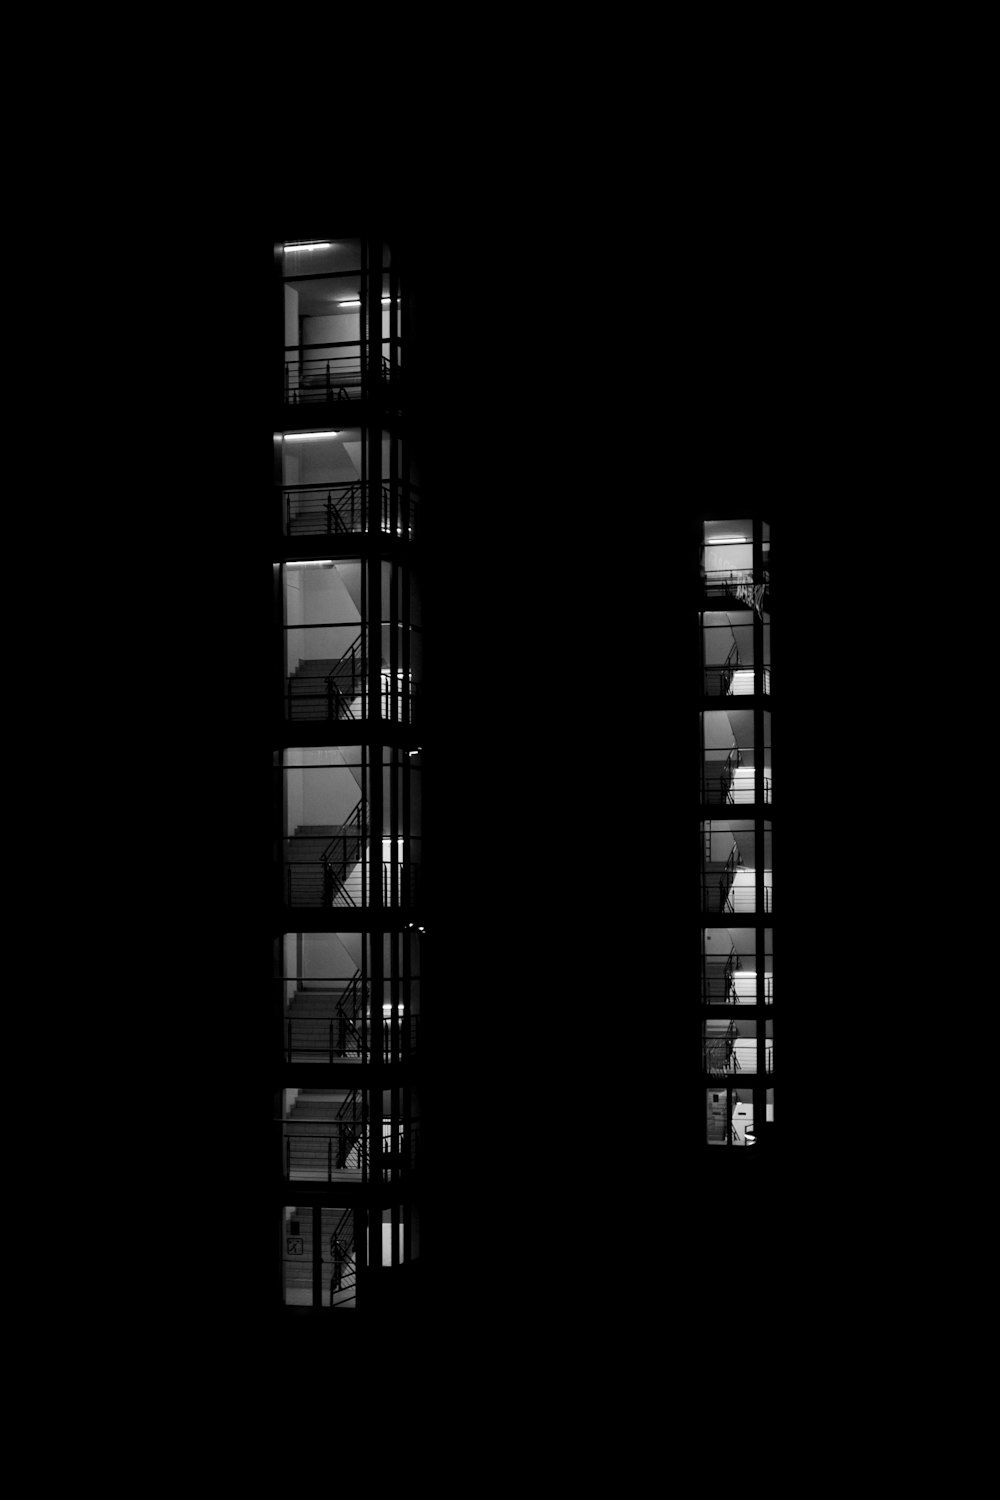 a black and white photo of windows in a dark room